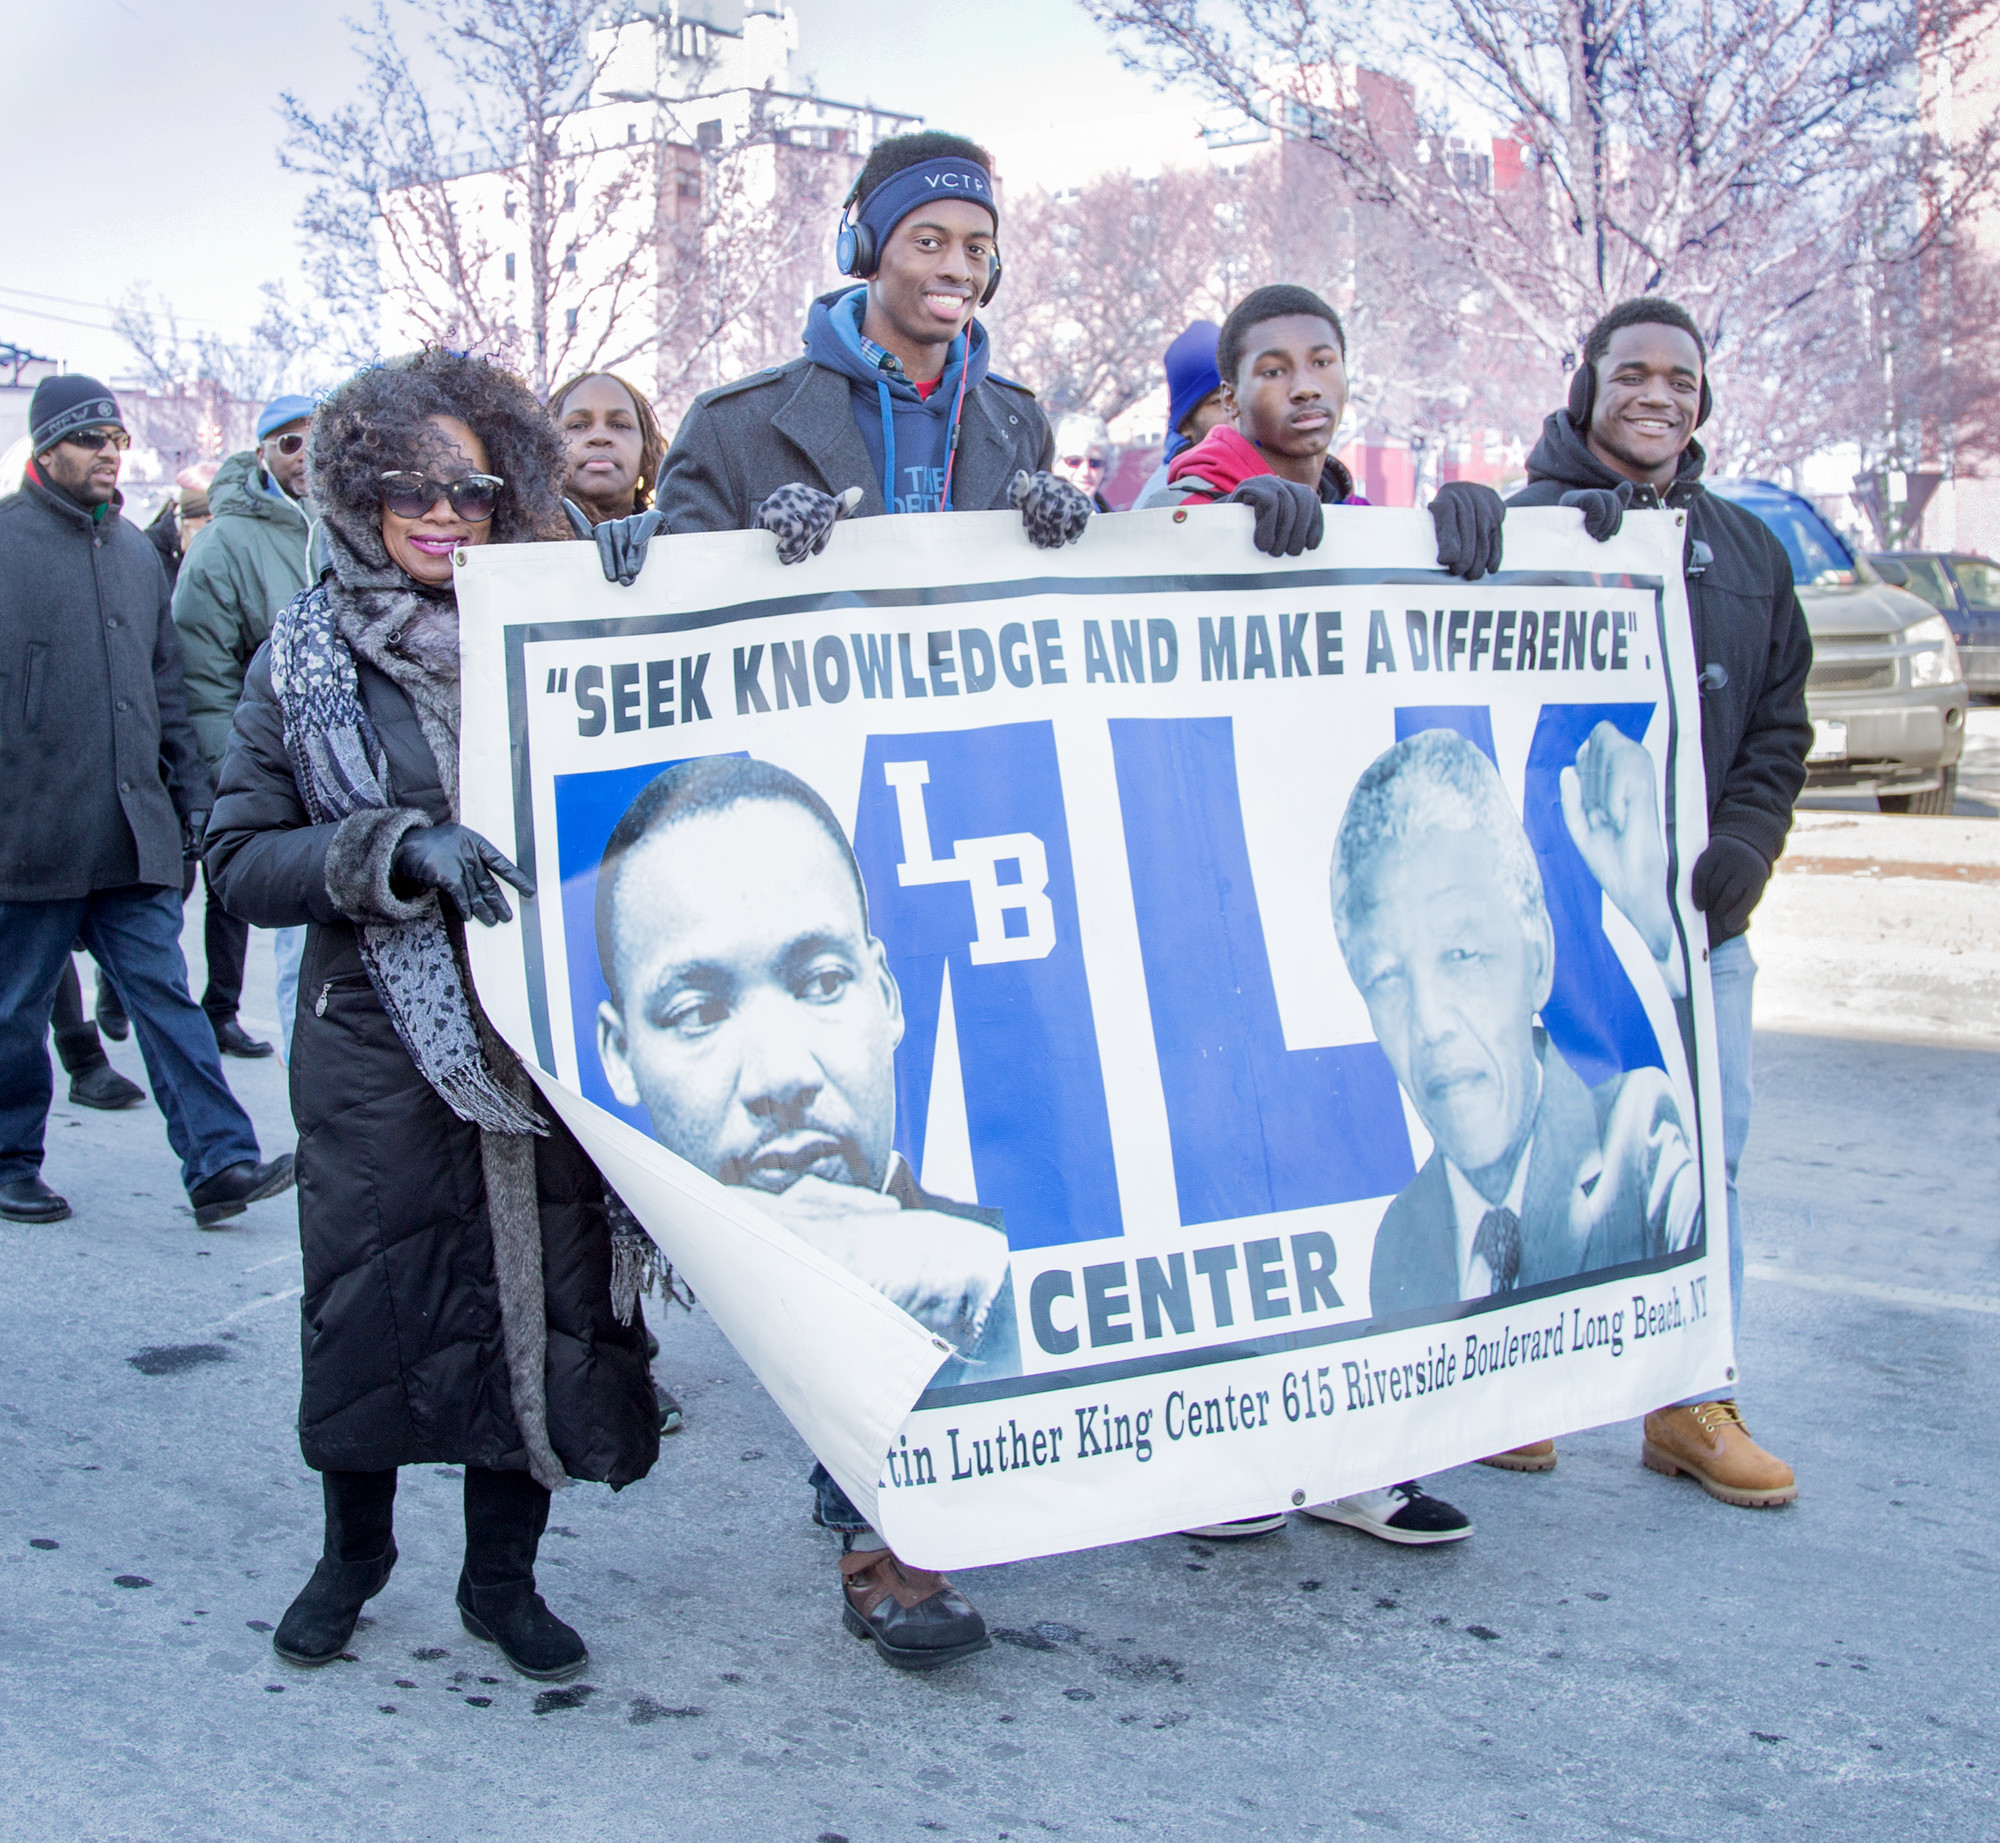 Hundreds participated in the MLK Center’s annual Martin Luther King Jr. commemorative march on Park Avenue on Monday. The parade route closely follows the one King took when he visited Long Beach in 1968. Photos by Kristie Arden/Herald